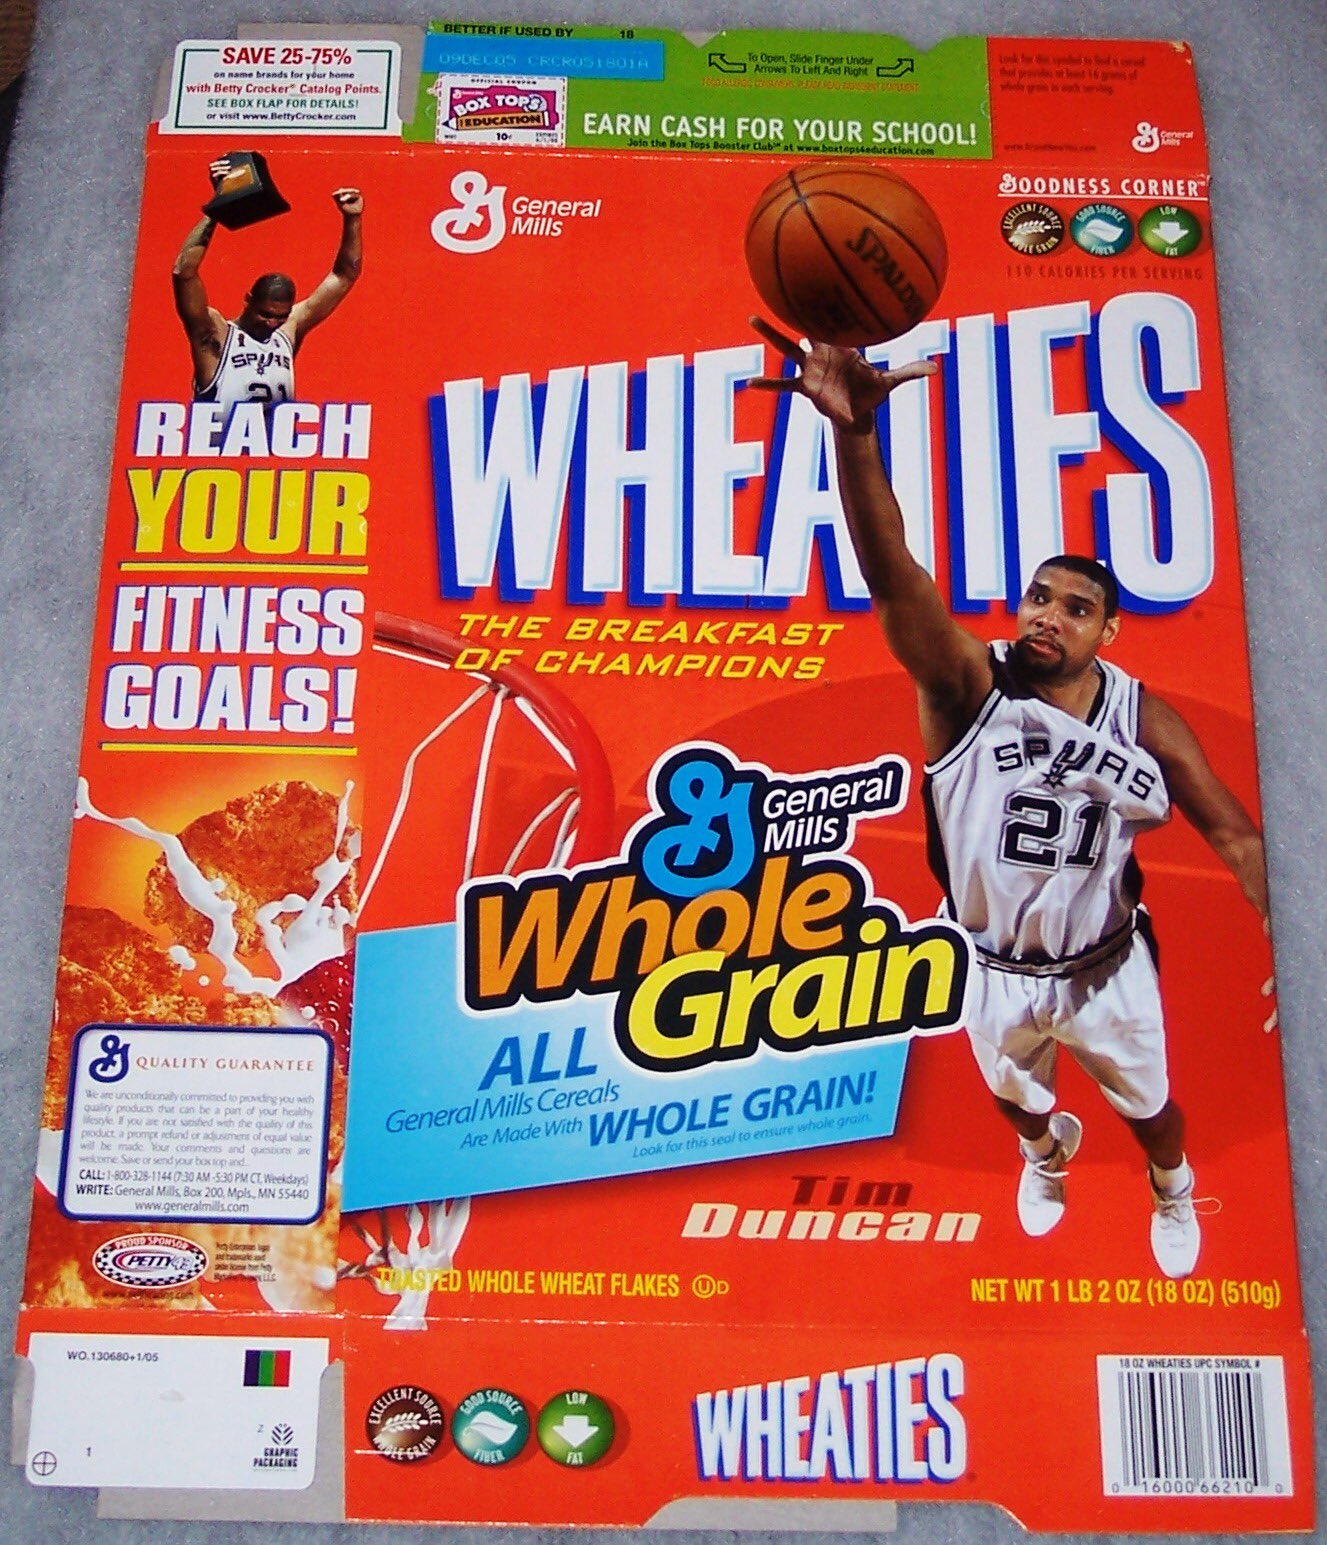 2005 Tim Duncan box. Happy Birthday to the former who turns 41 years old today! 